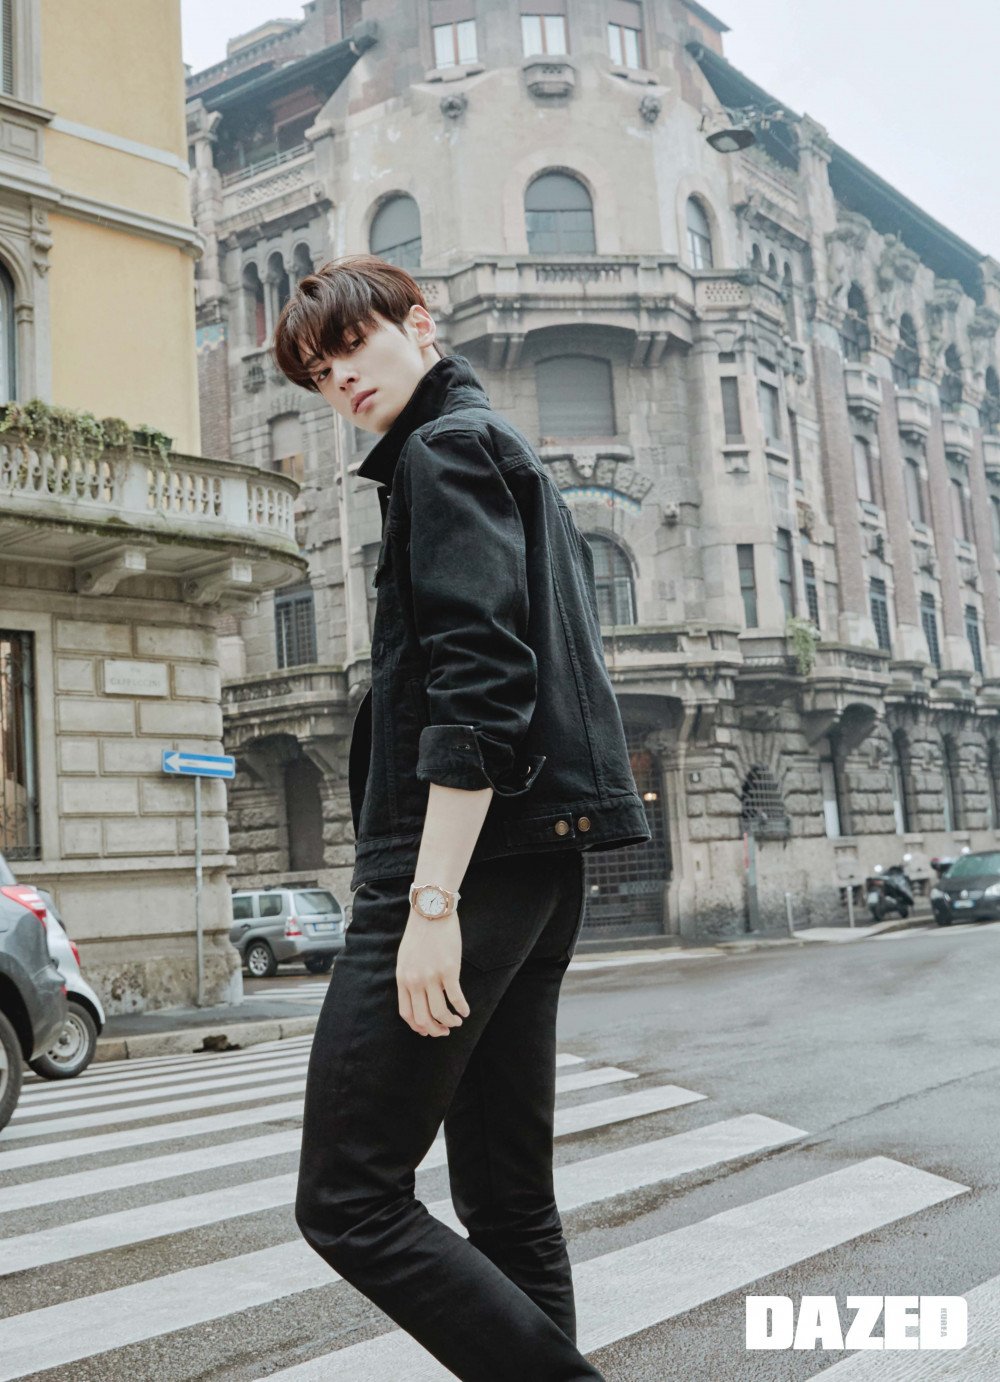 Cha Eun Woo is a heartthrob in the streets of Milan for 'Dazed